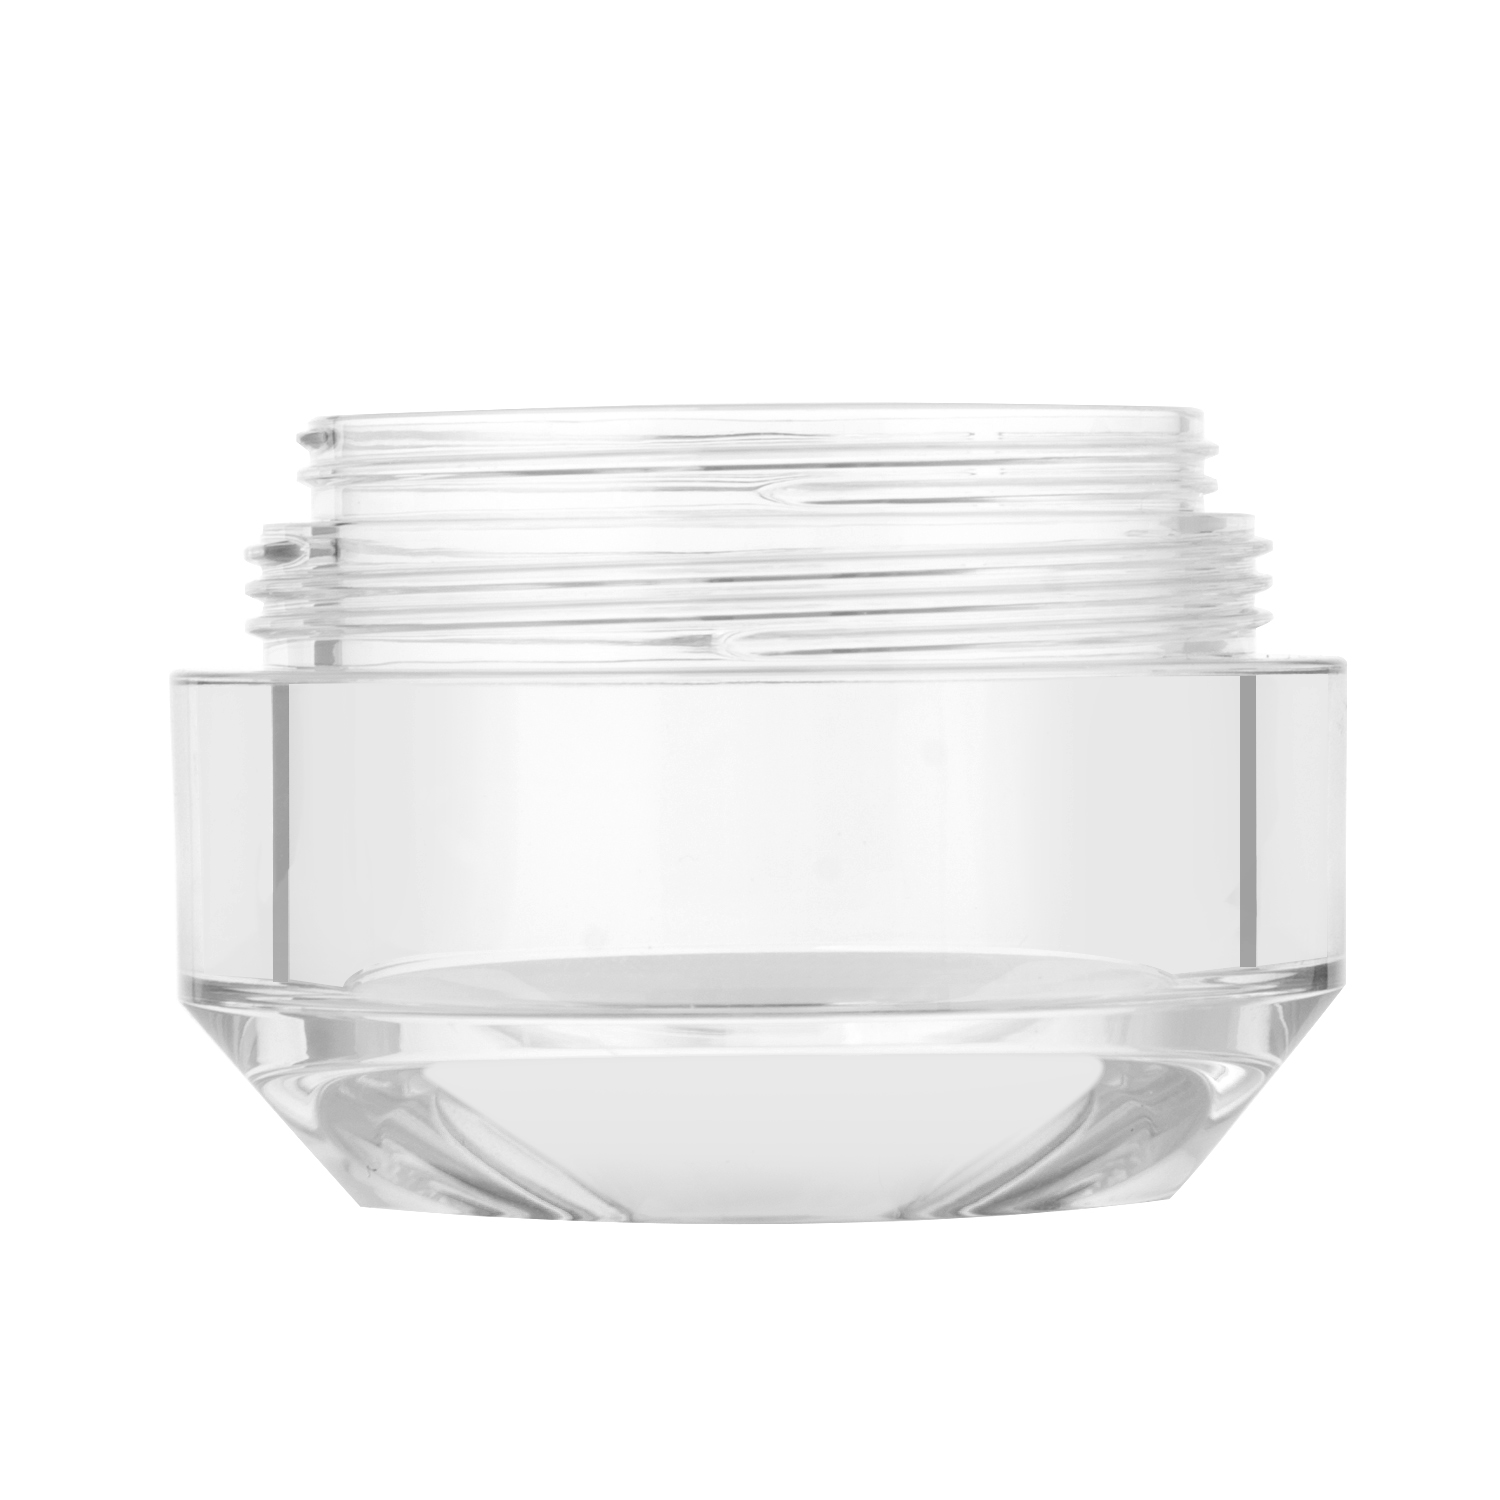 50g Refillable Plastic Jar With Replaceable Inner High Quality Sustainable Cosmetic Packaging